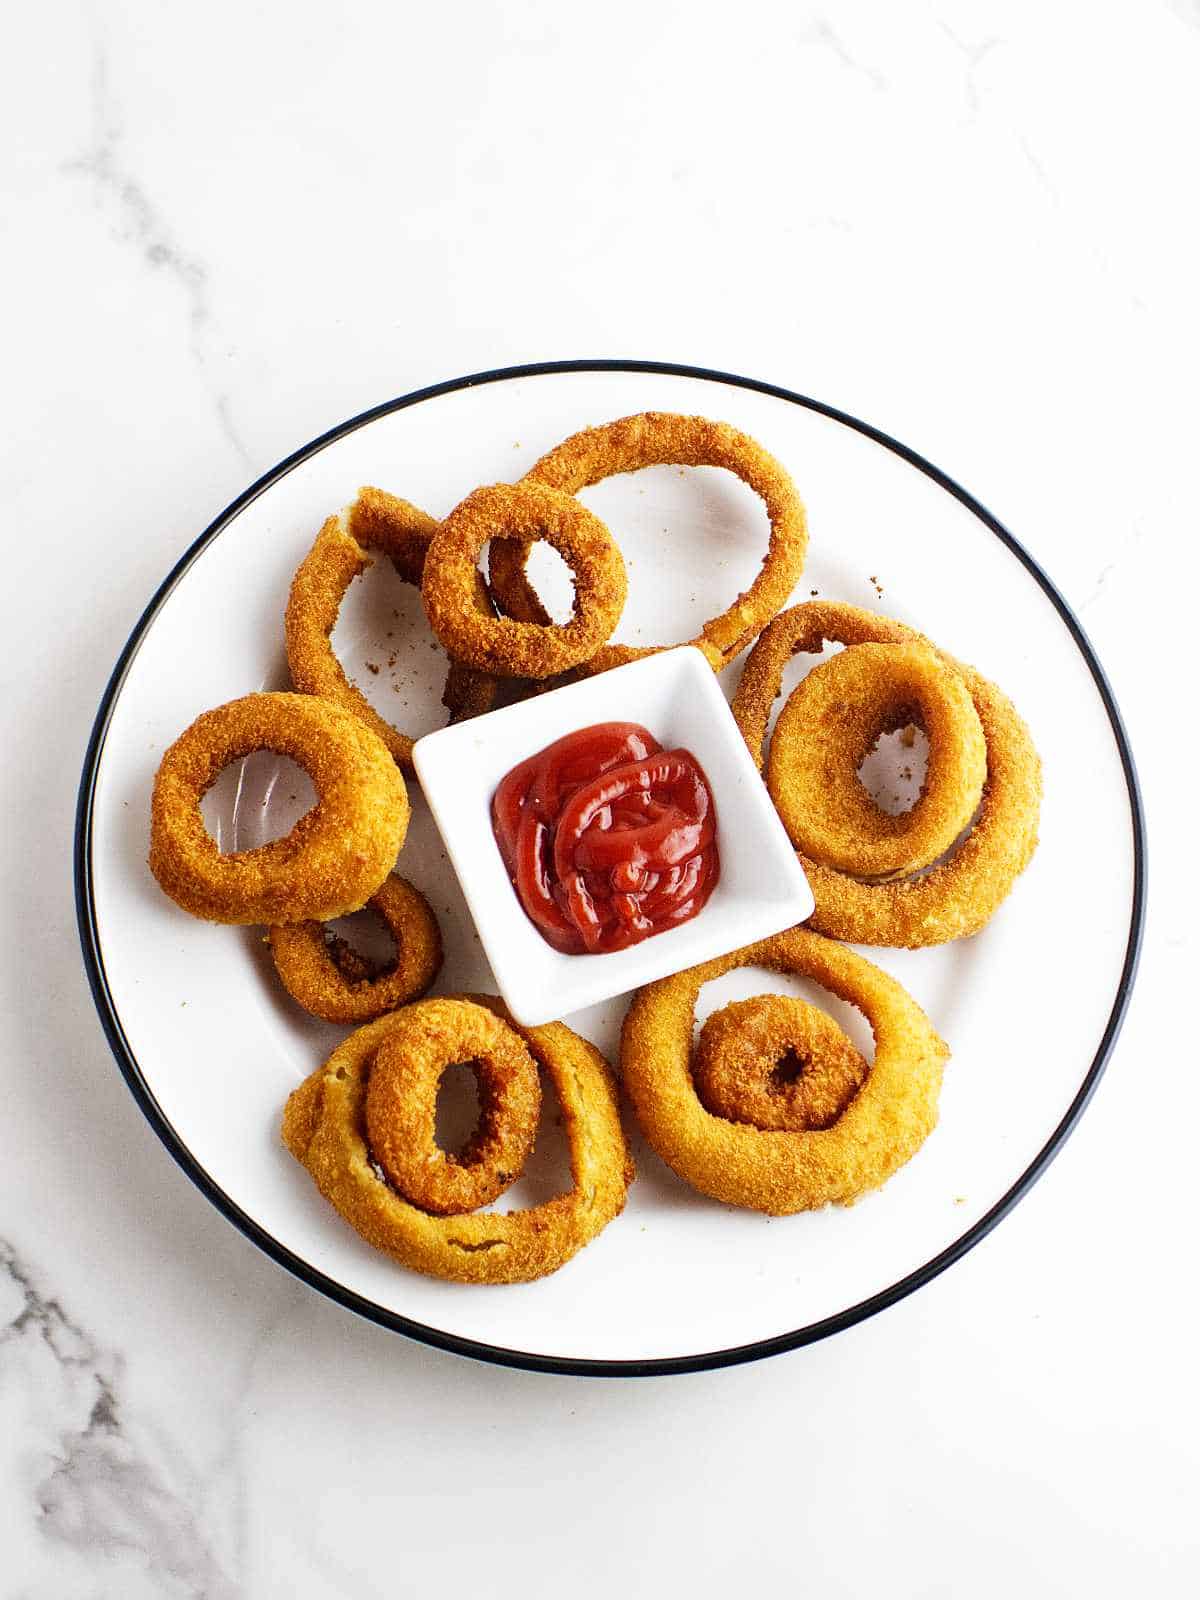 golden browned air fryer onion rings on a plate with a sauce bowl of ketchup.